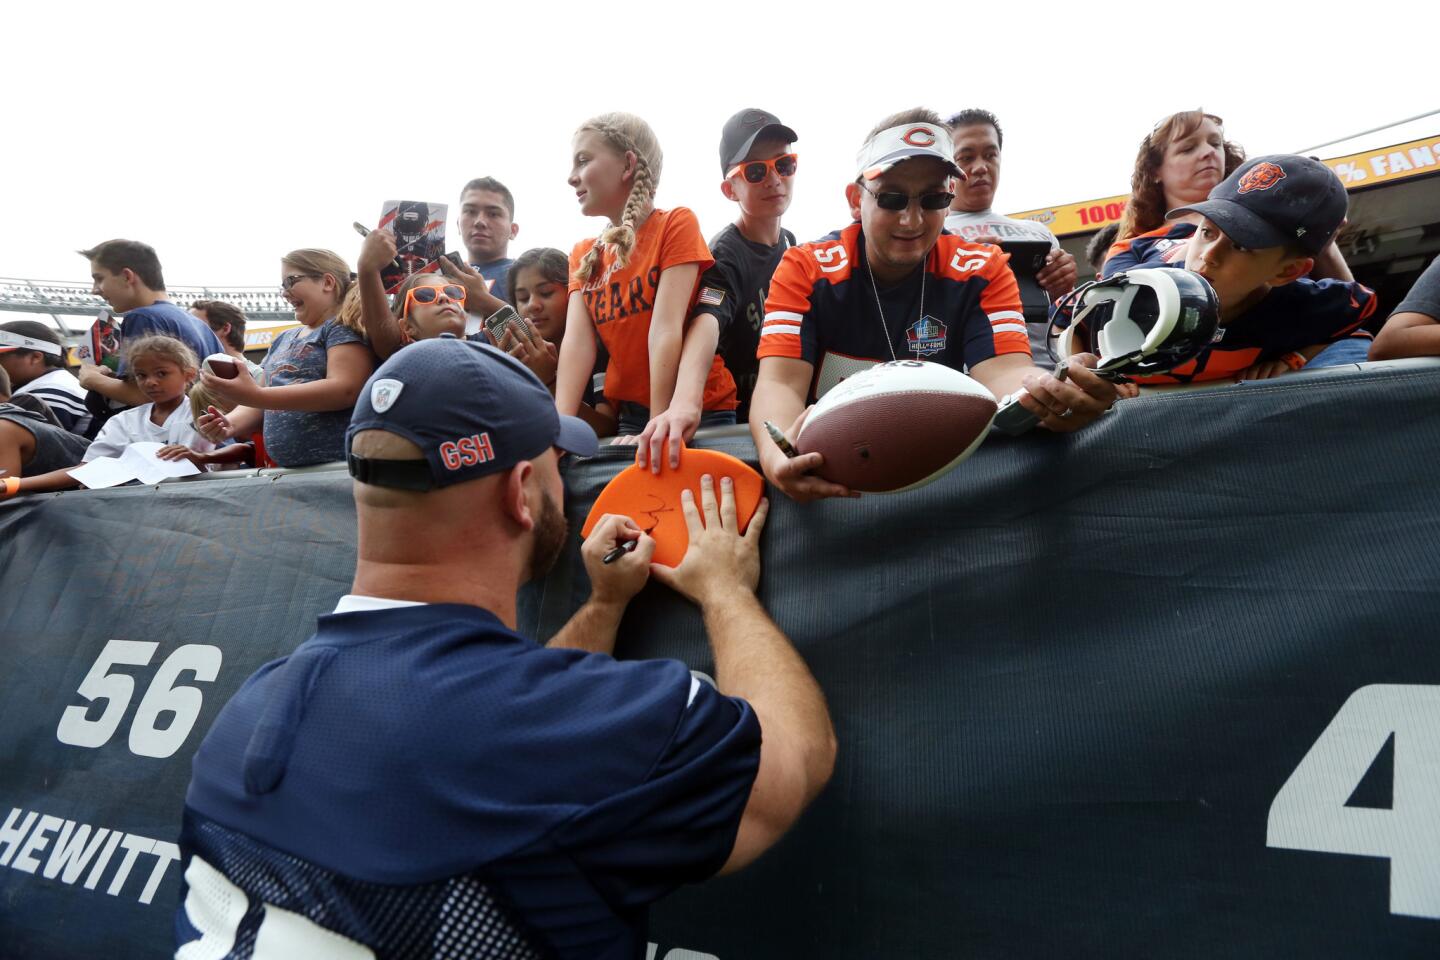 Kyle Long signs autographs during the Bears Family Fest at Soldier Field on Aug. 5, 2017.